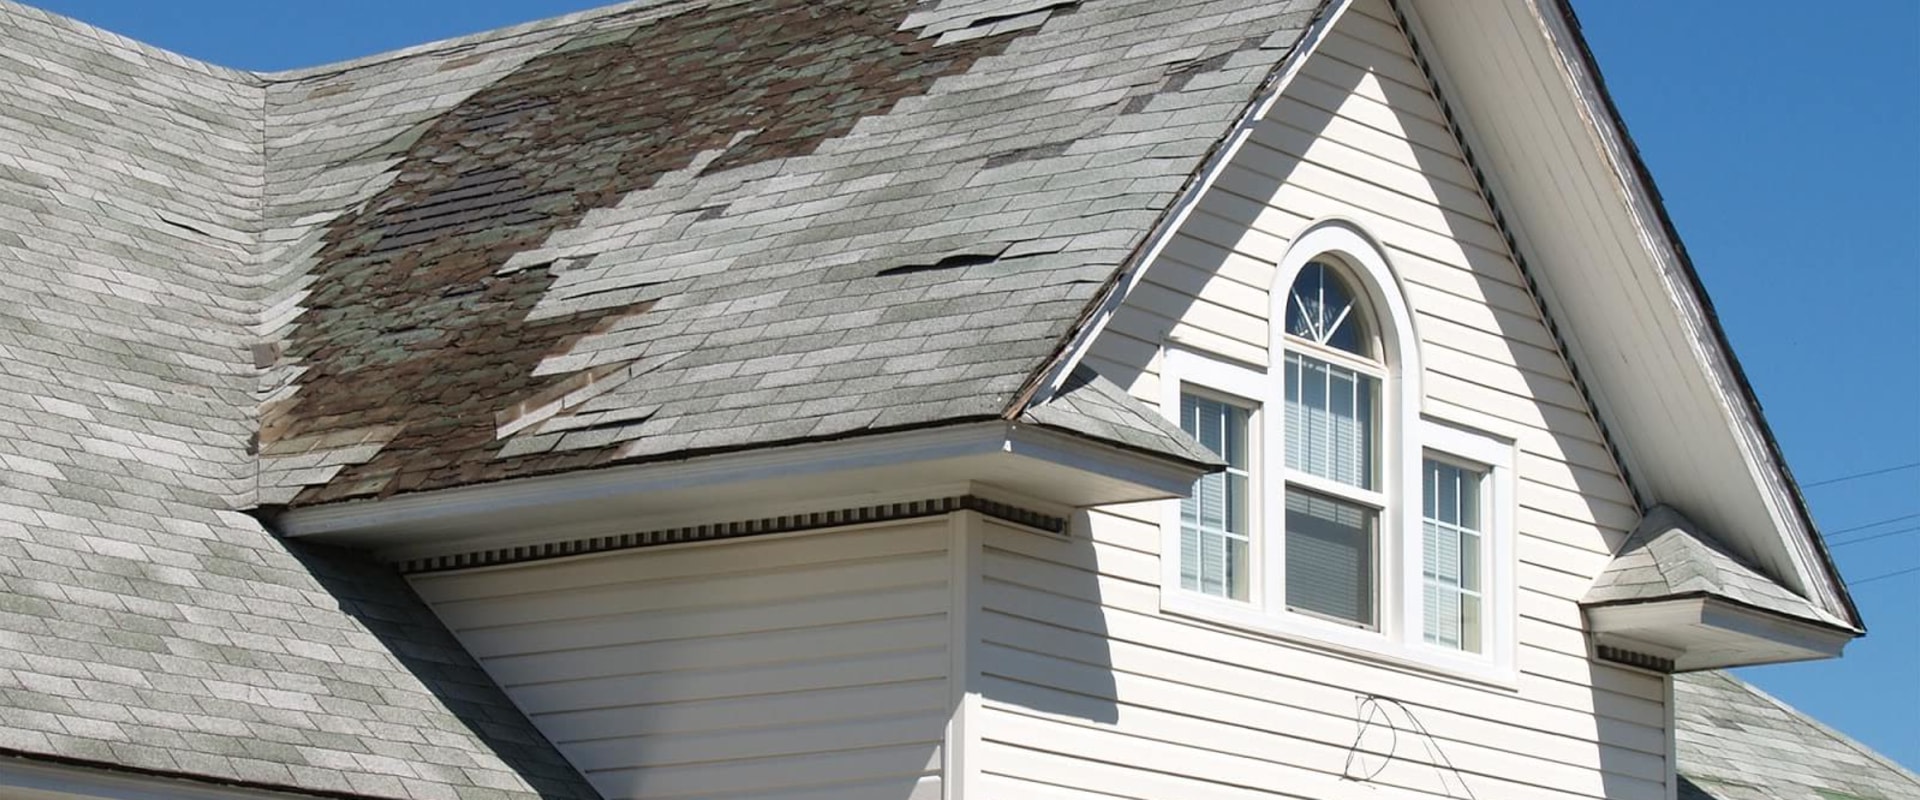 What are the most common roof problems?